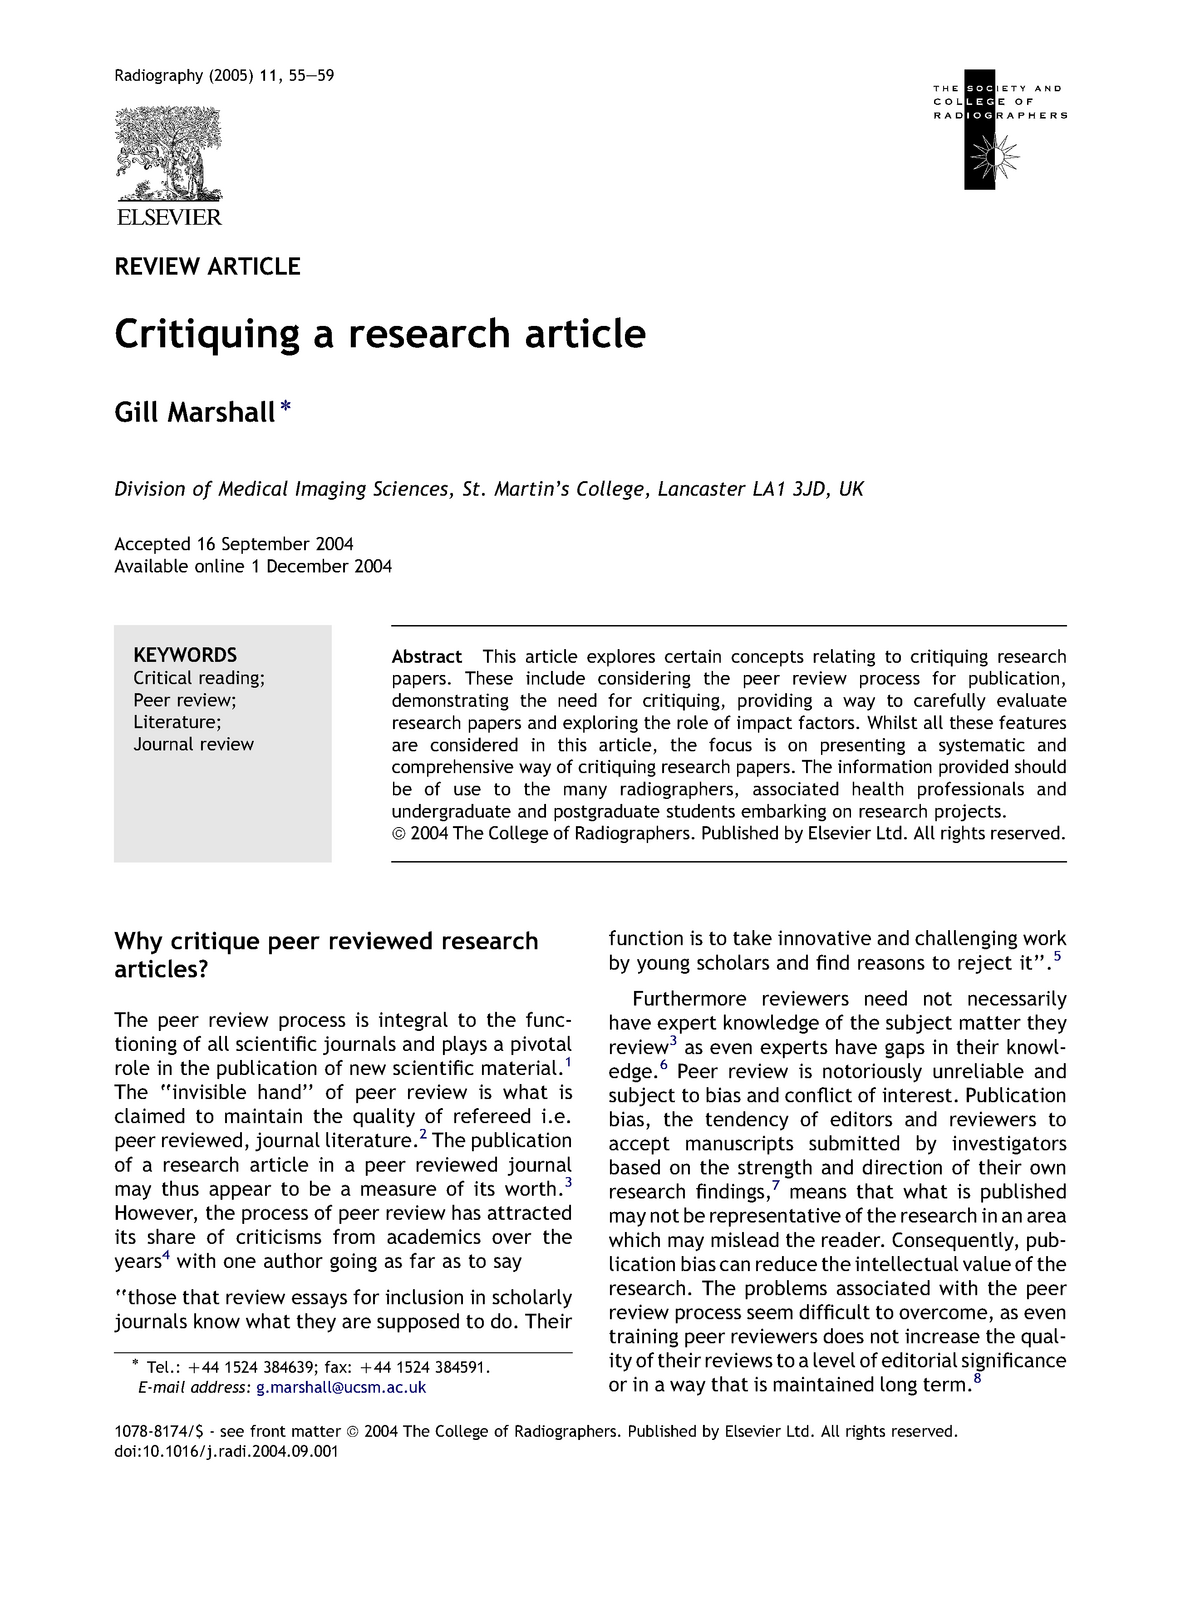 questions to ask when critiquing a research article